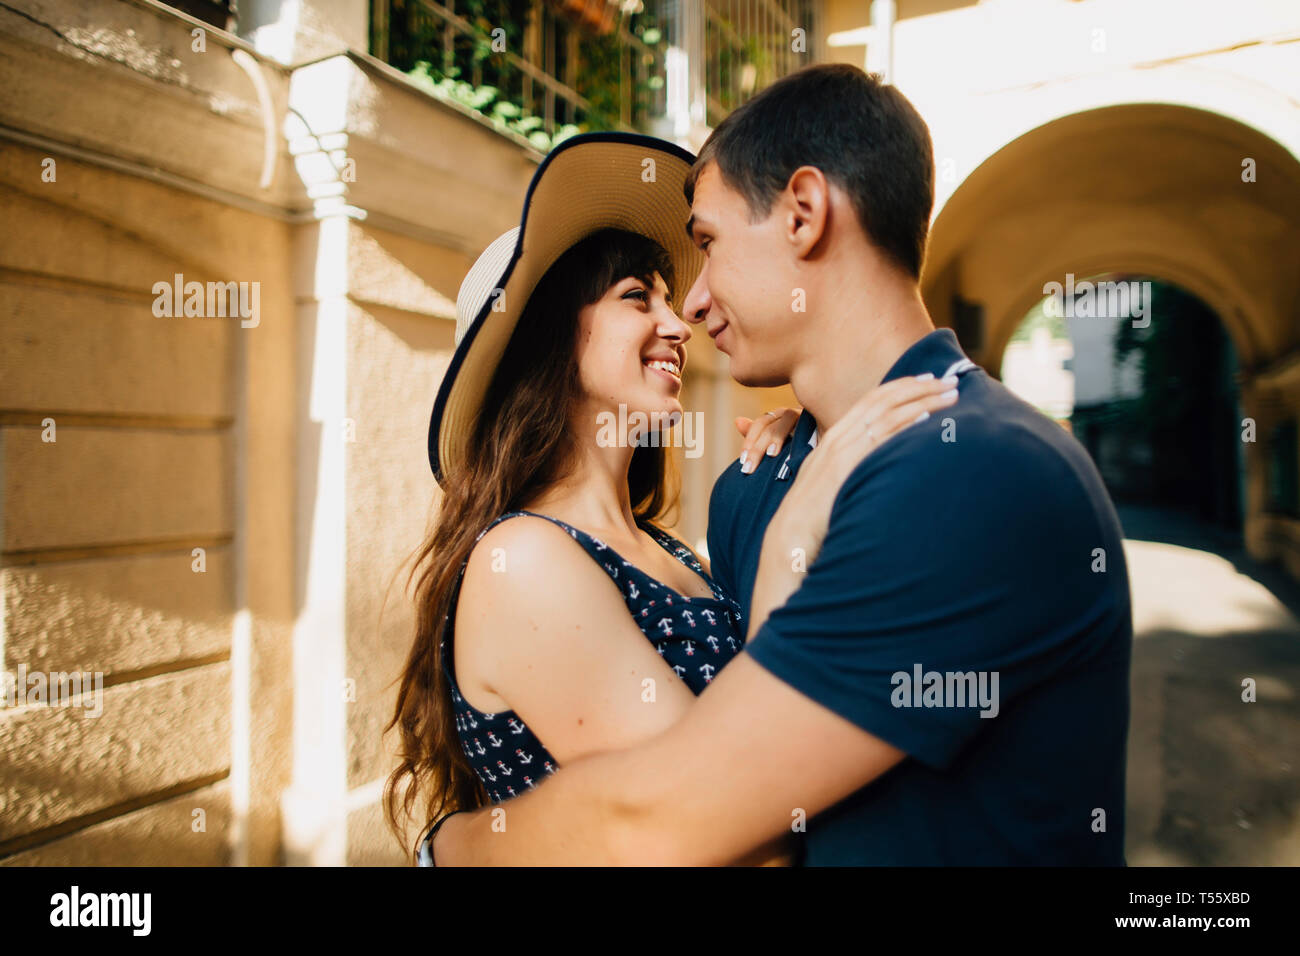 Young couple embracing in courtyard Stock Photo